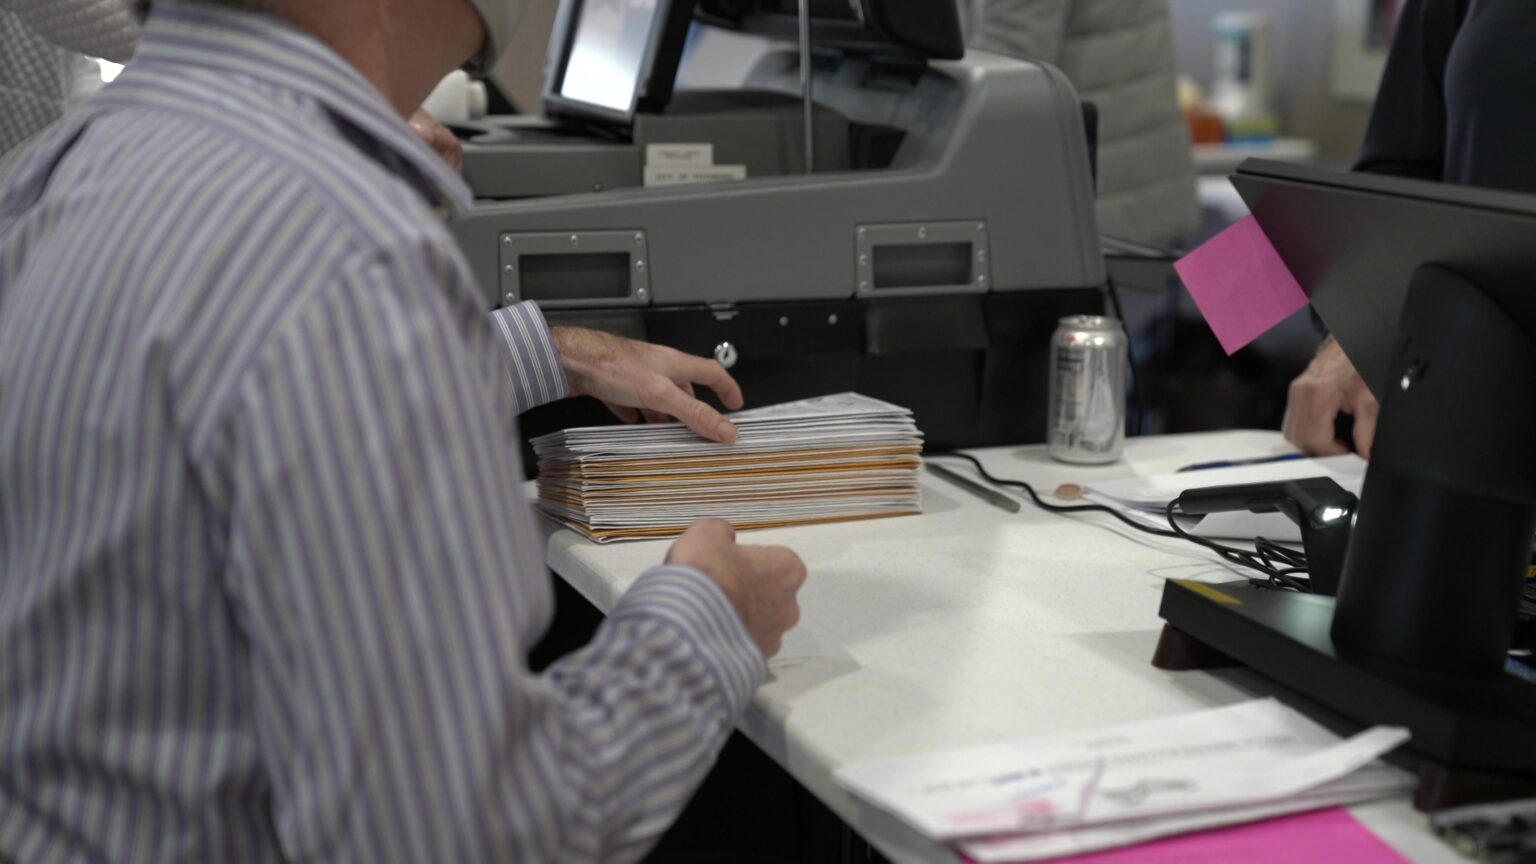 A seated person selects a folded absentee ballot envelope from the top of a stack on a table, with a ballot tabulation machine and standing people in the background.